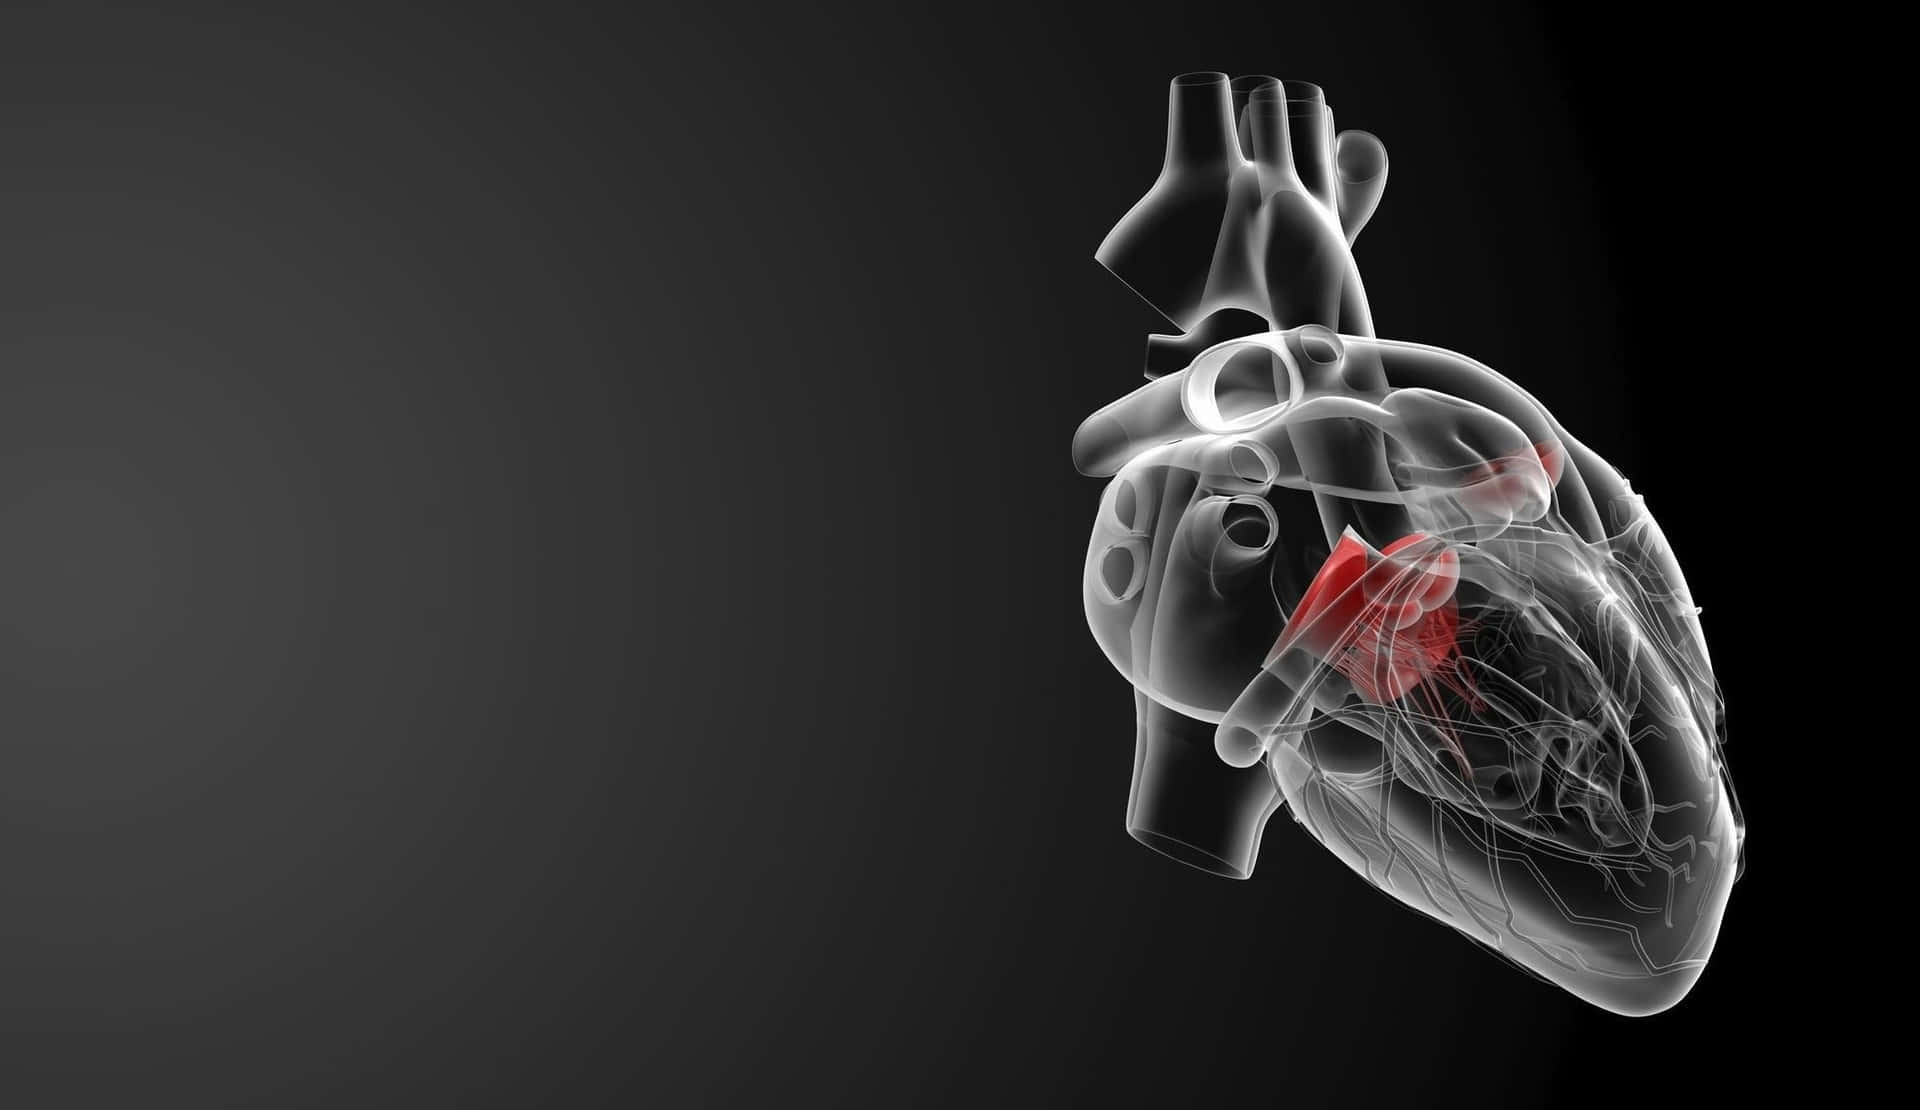 Download Black And White Human Heart Hd Medical Wallpaper 